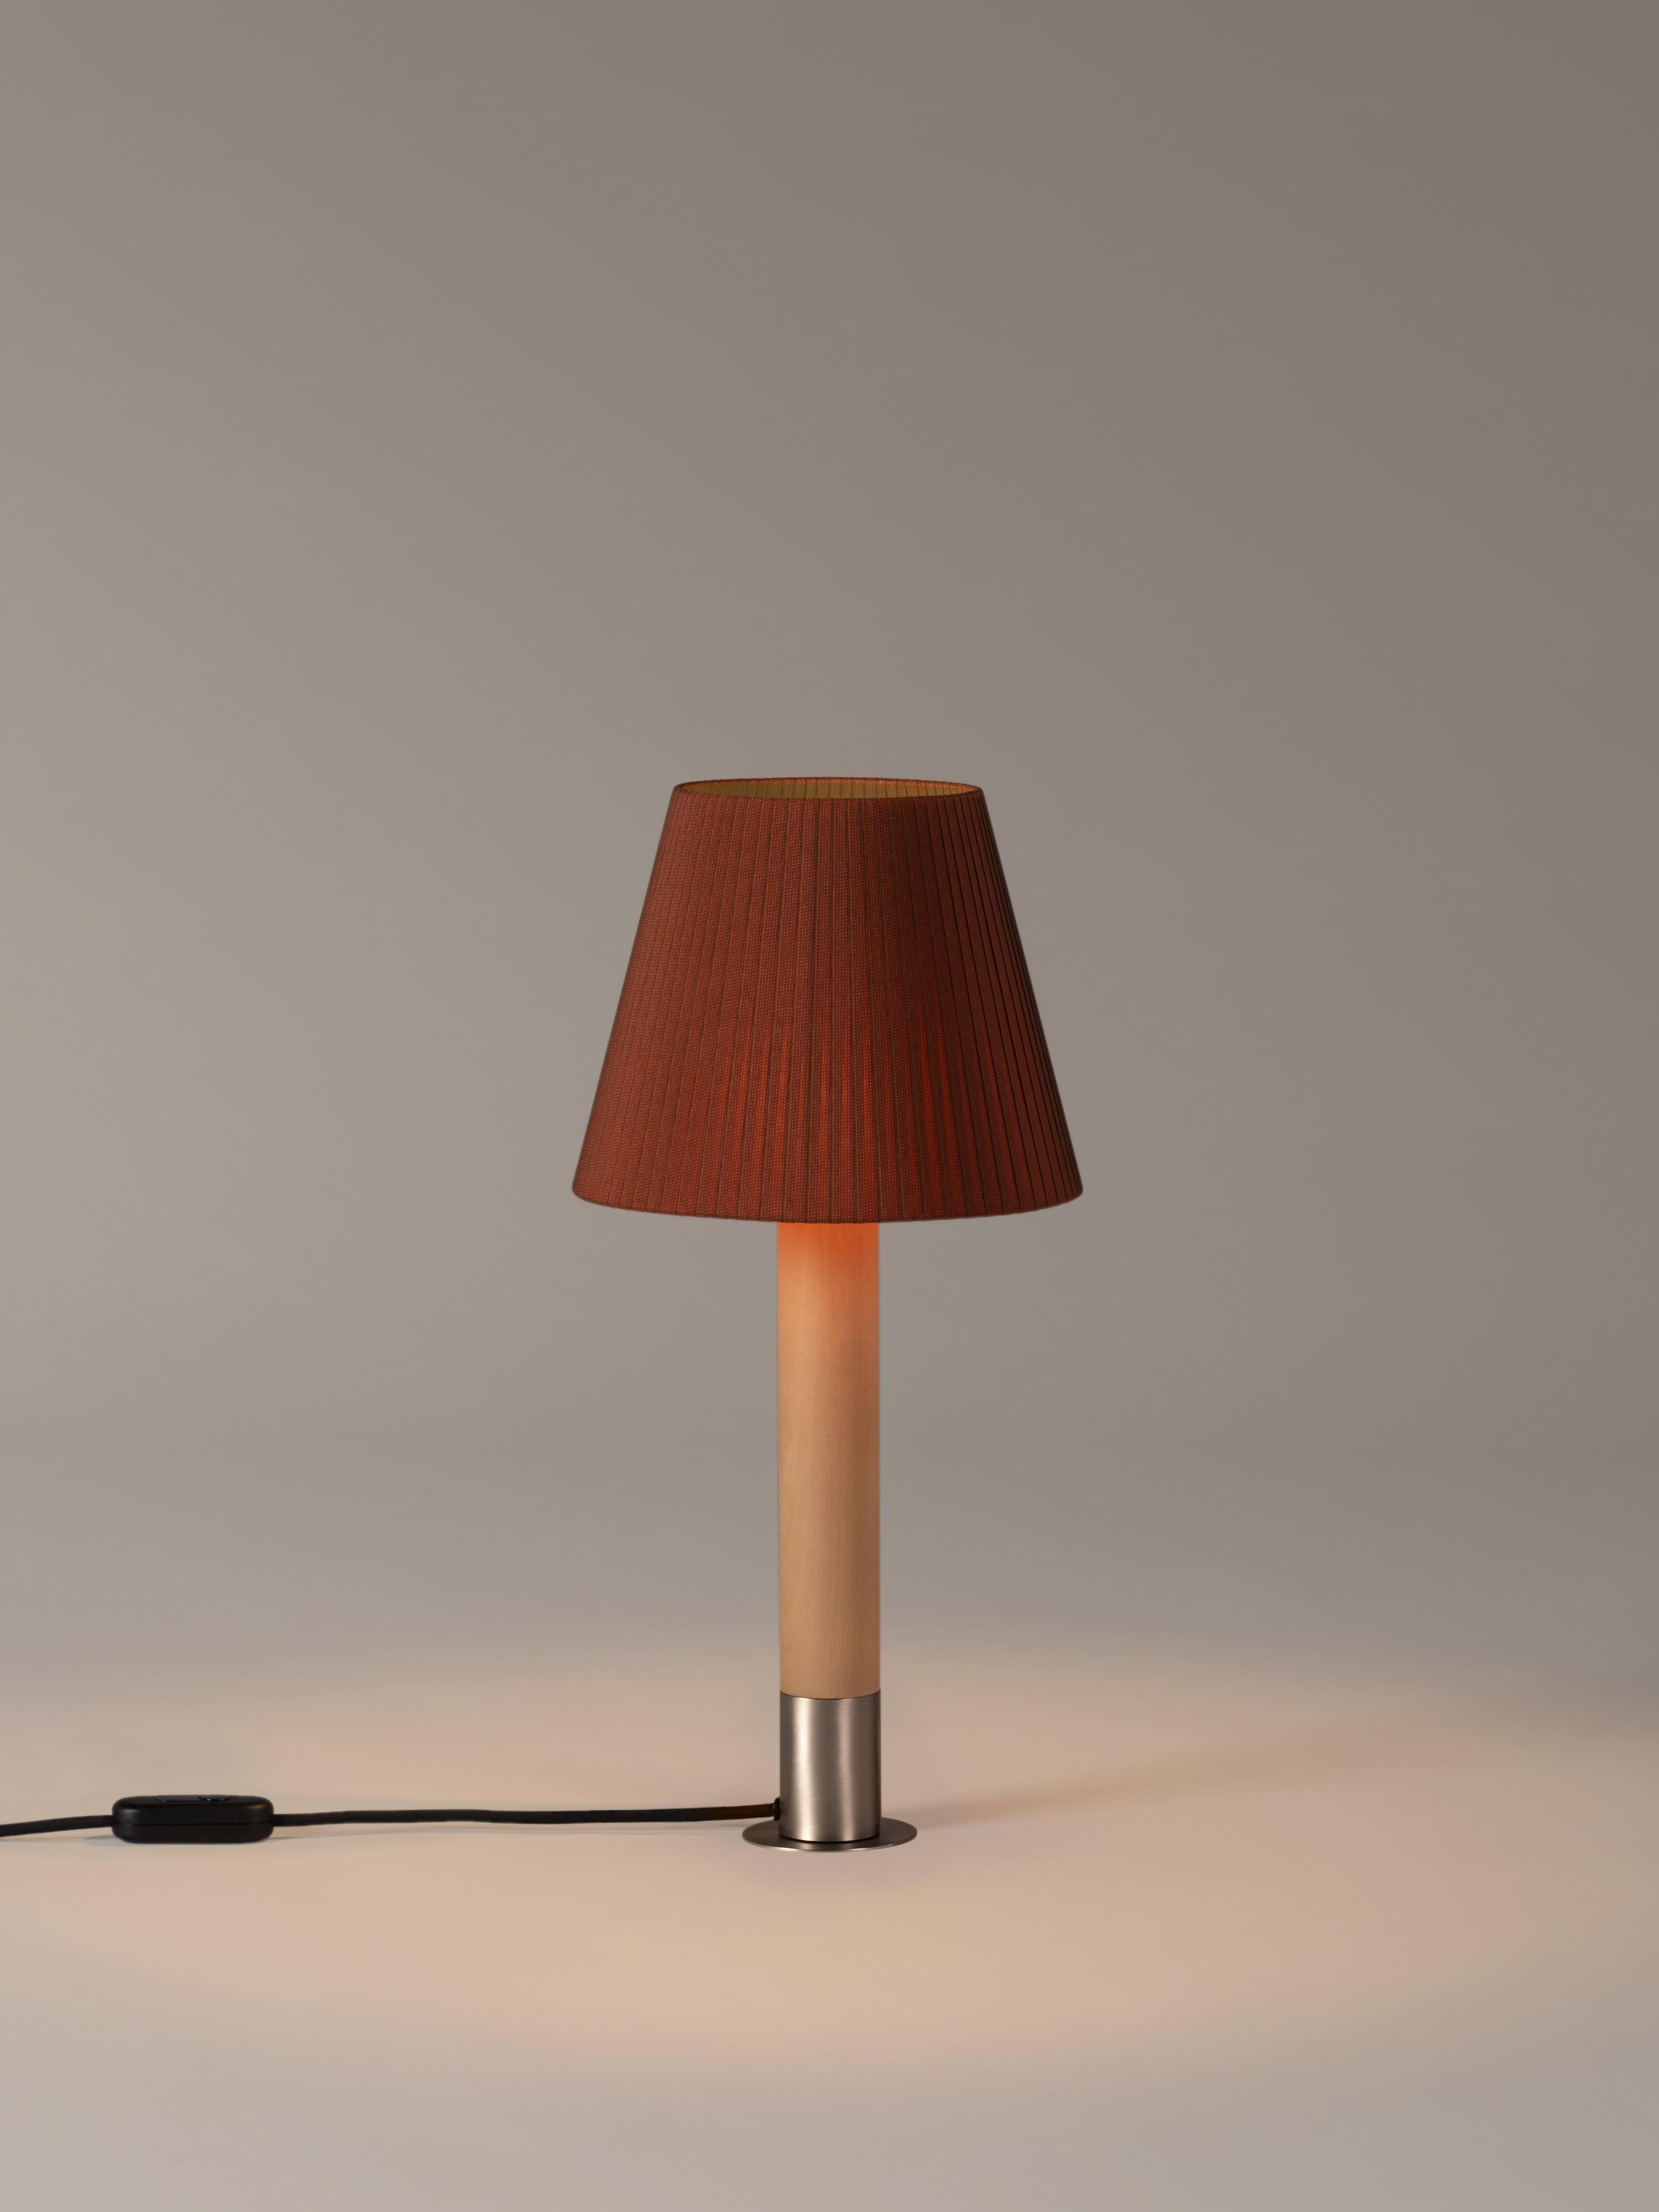 Nickel and Terracotta Básica M1 table lamp by Santiago Roqueta, Santa & Cole
Dimensions: d 25 x h 52 cm
Materials: Nickel, birch wood, ribbon.
Available in other shade colors and with or without the stabilizing disc.
Available in nickel or